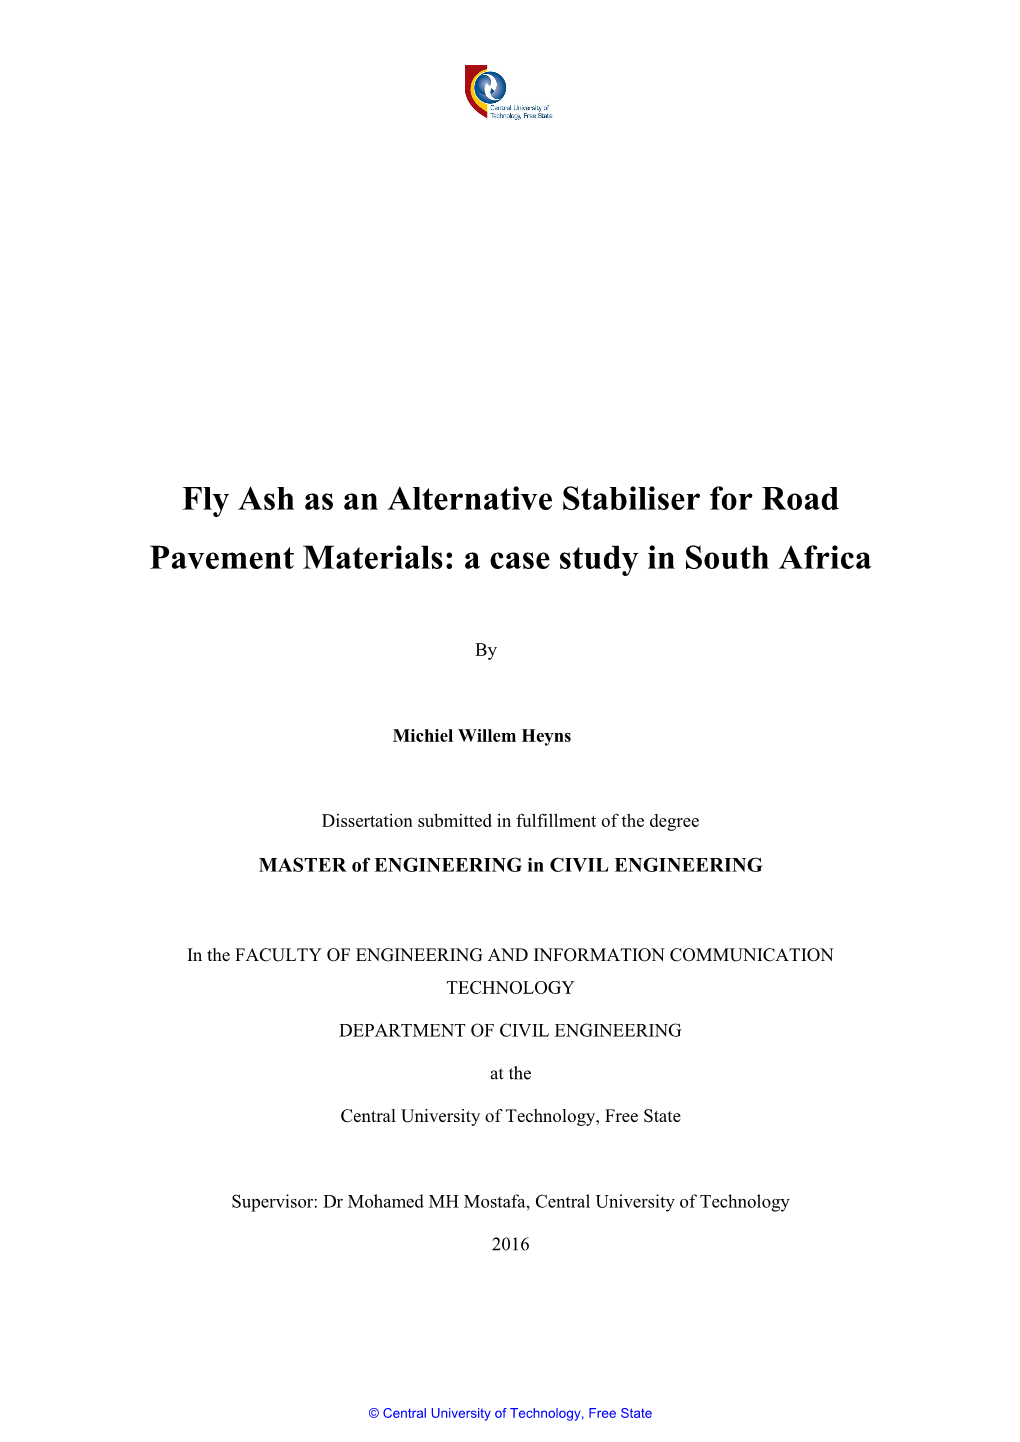 Fly Ash As an Alternative Stabiliser for Road Pavement Materials: a Case Study in South Africa